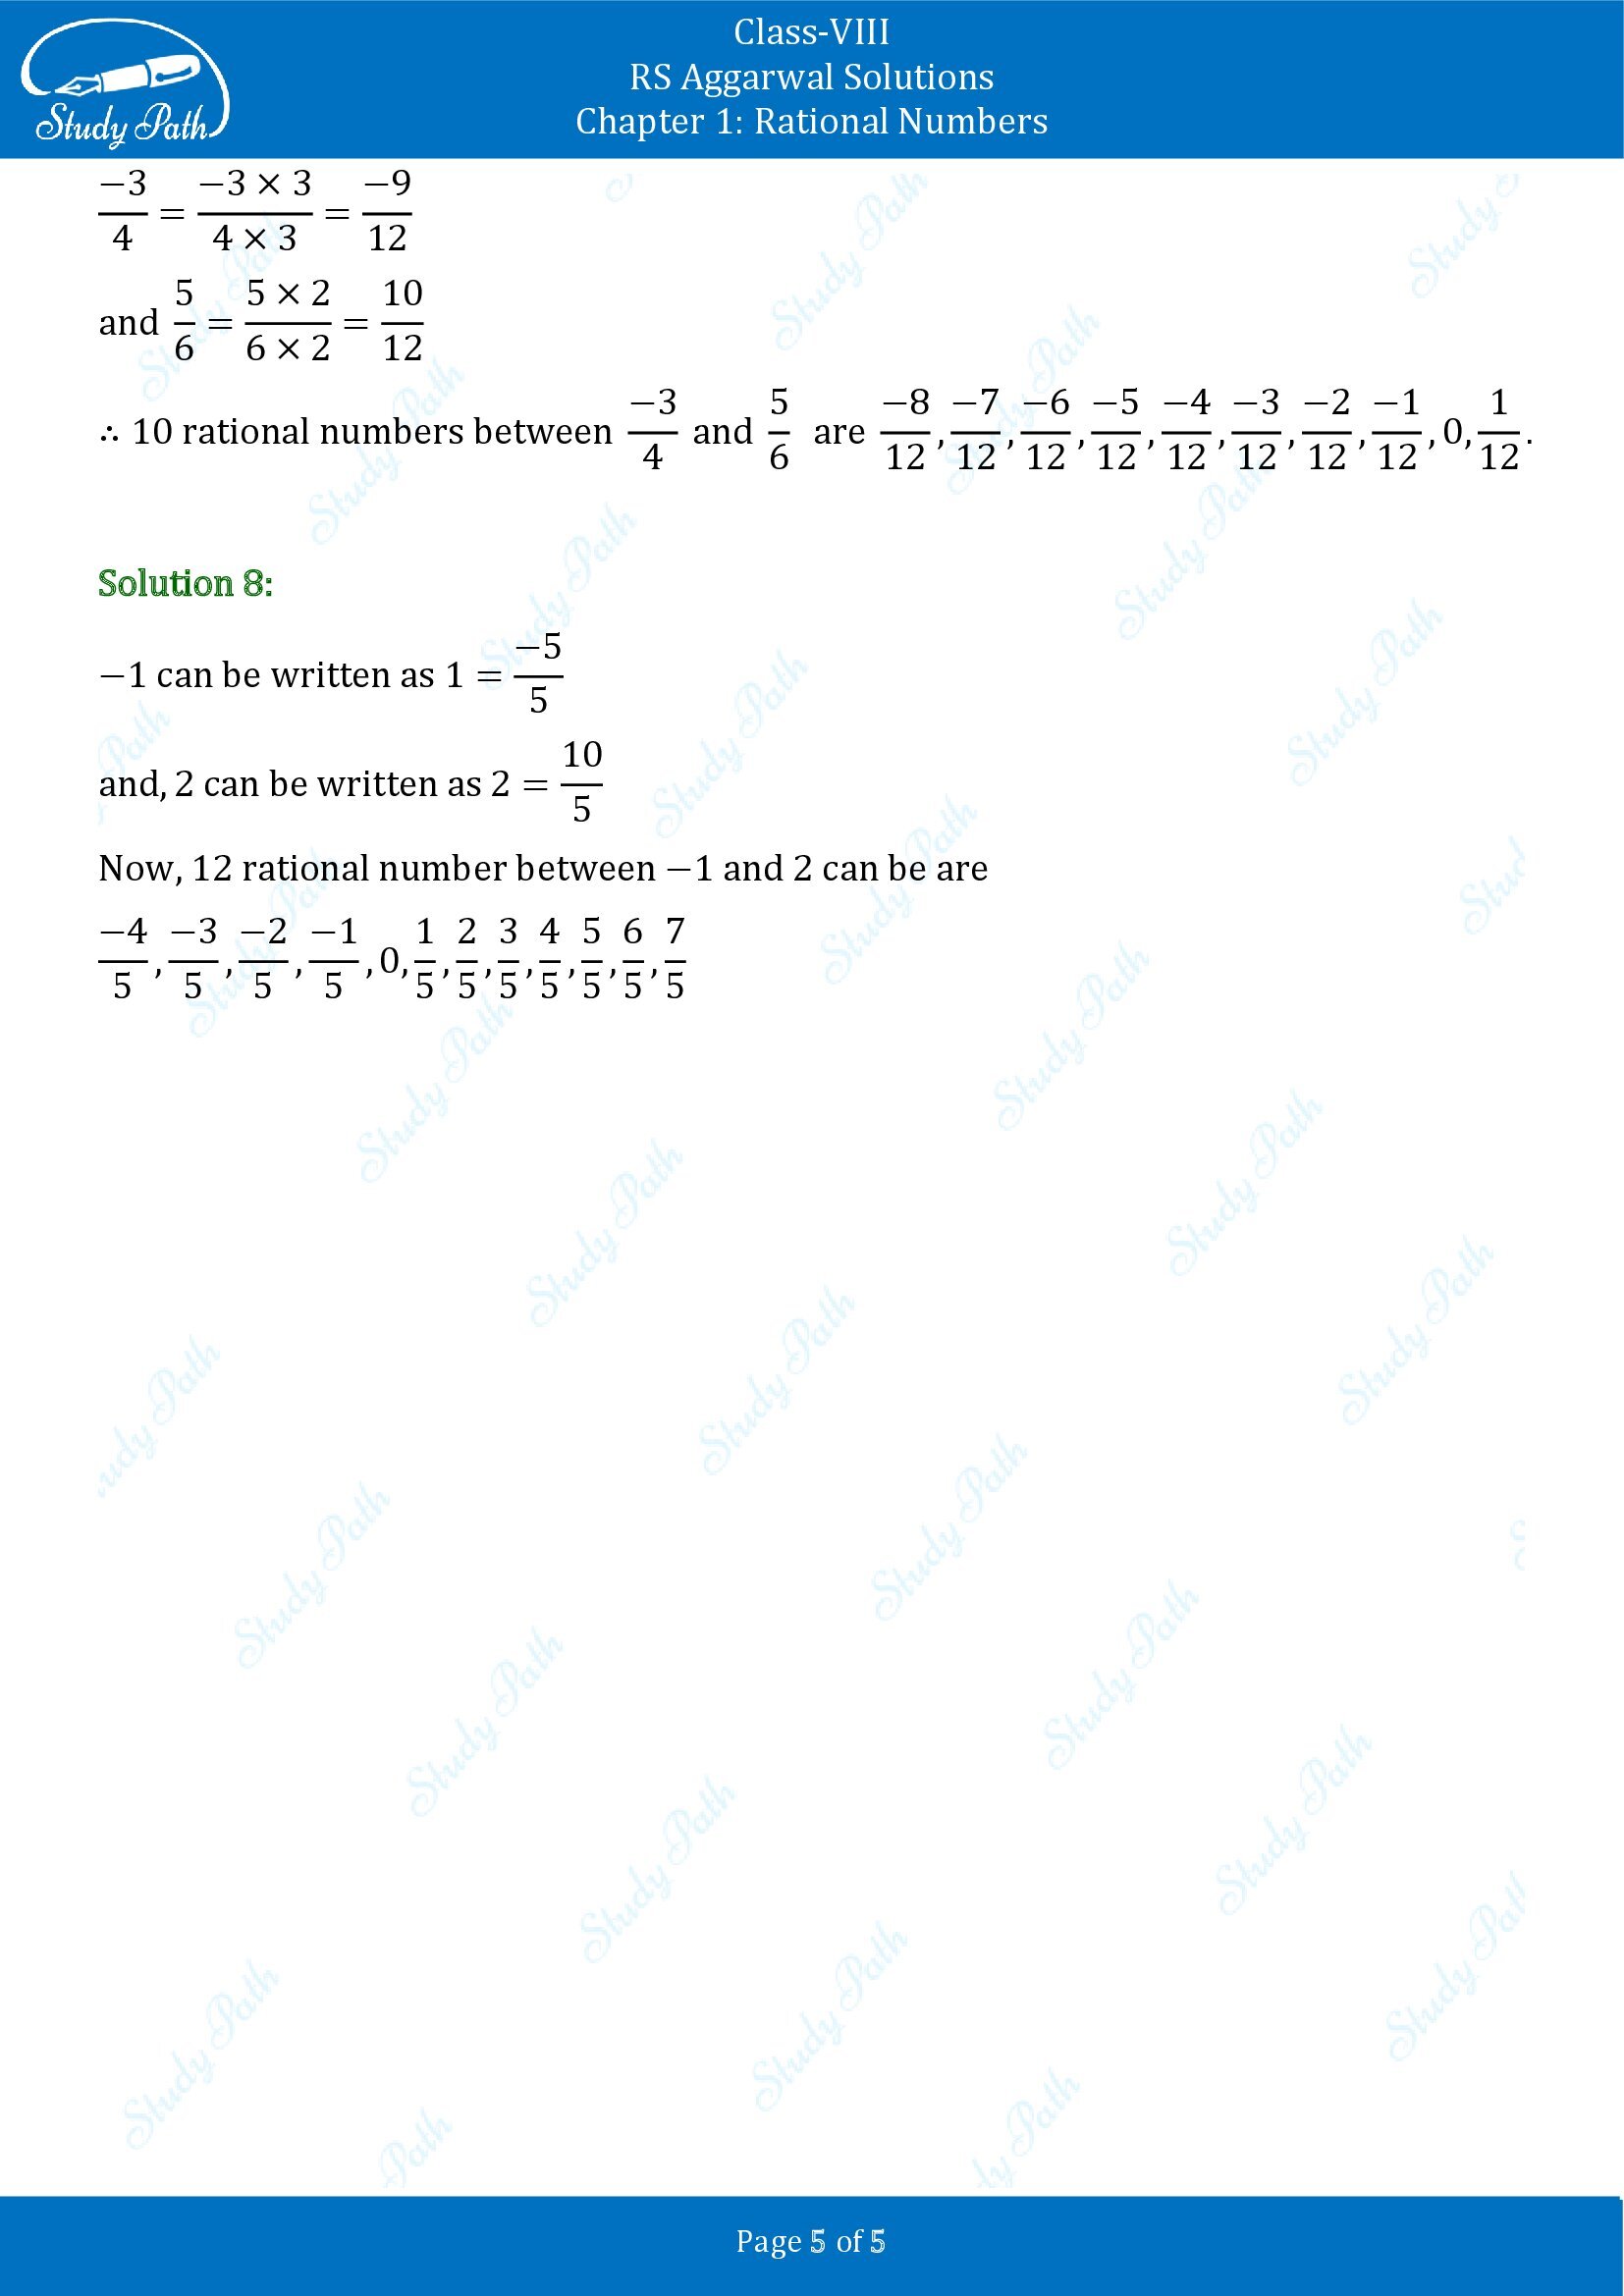 RS Aggarwal Solutions Class 8 Chapter 1 Rational Numbers Exercise 1F 00005